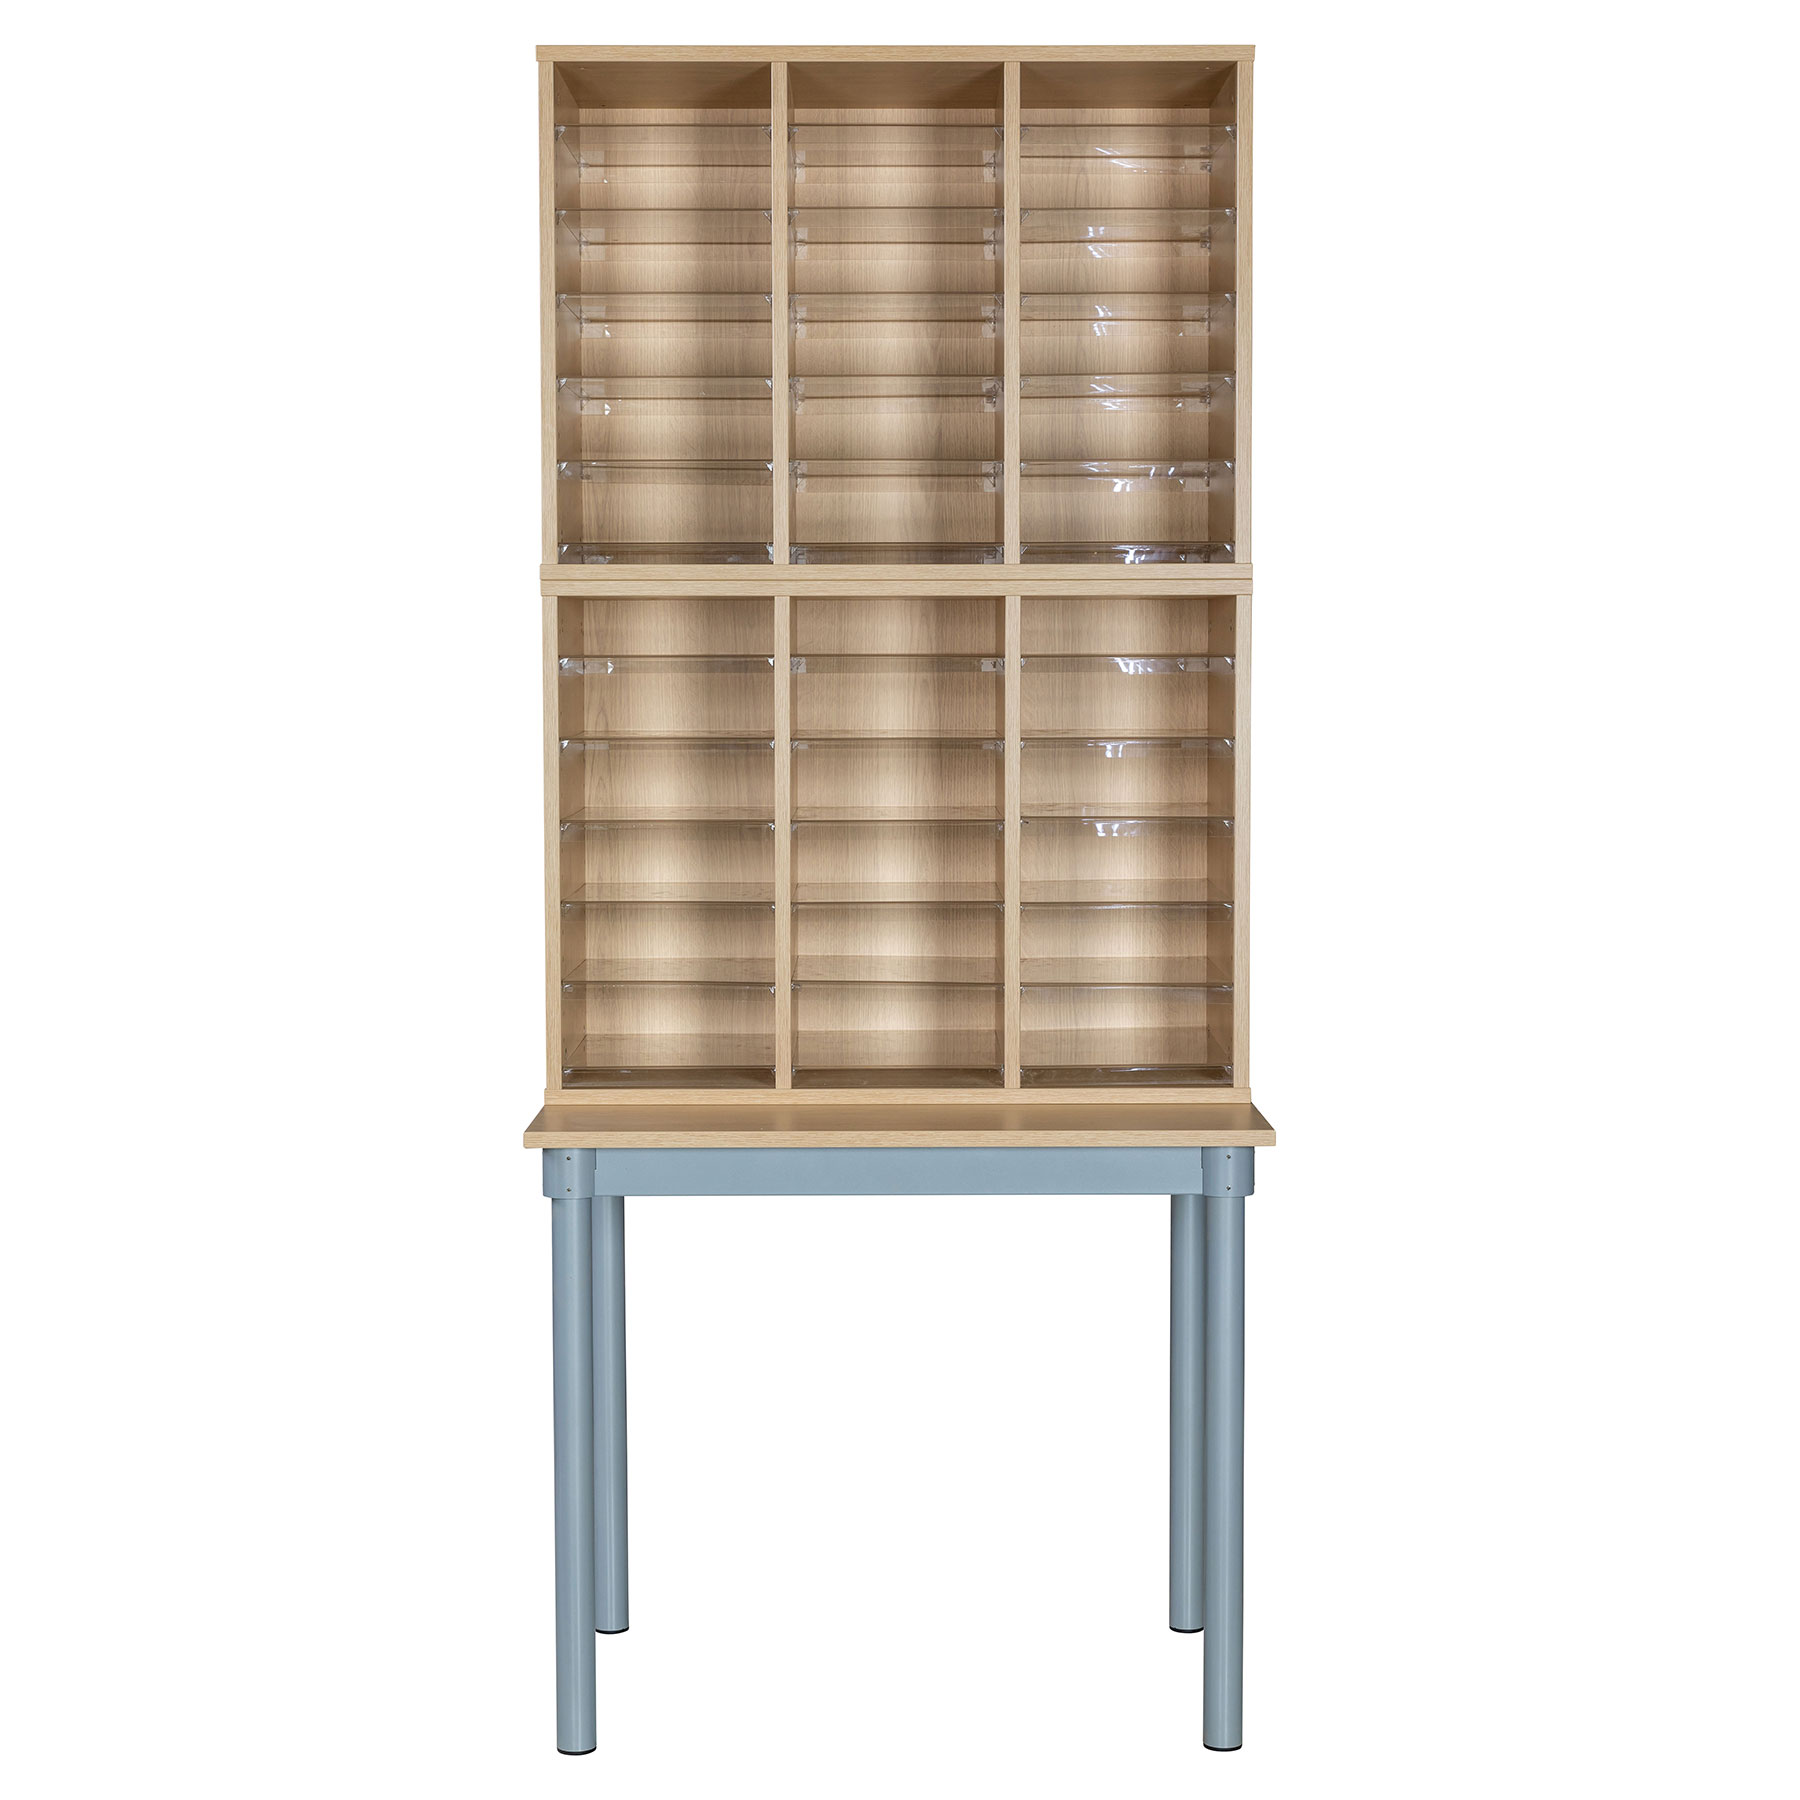 36 Compartment Pigeonhole Store + Table